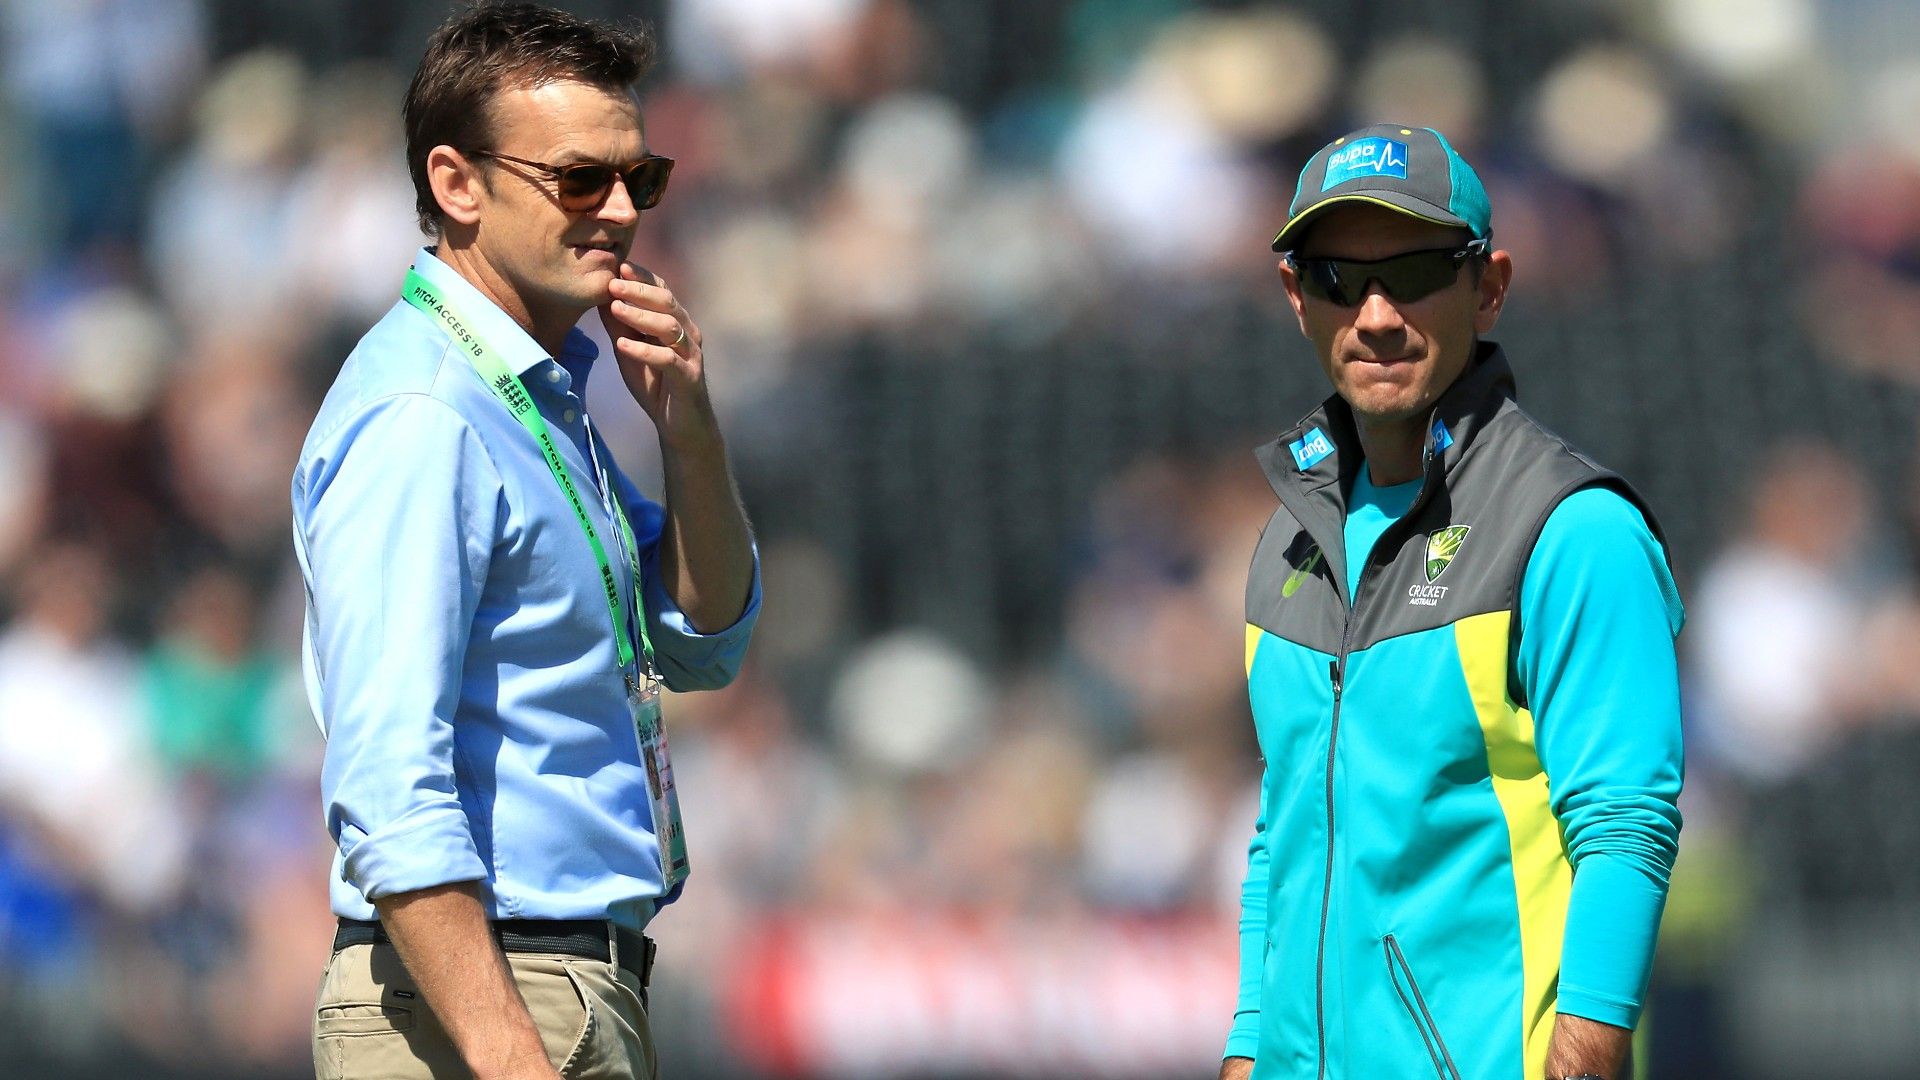 Adam Gilchrist says Justin Langer has been painted as a 'monster' as Michael Clarke goes in to bat for Pat Cummins